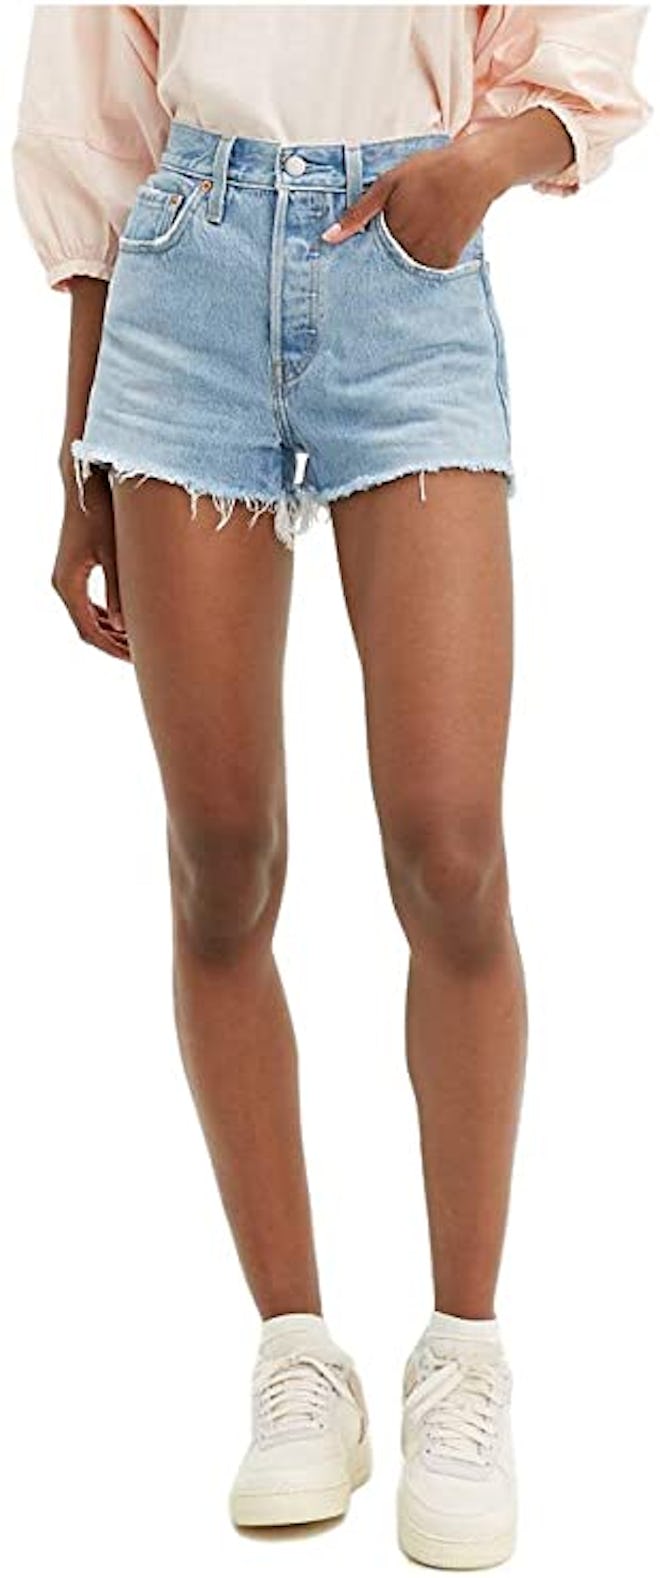 Best High-Waisted Levi's Jean Cut-Off Shorts